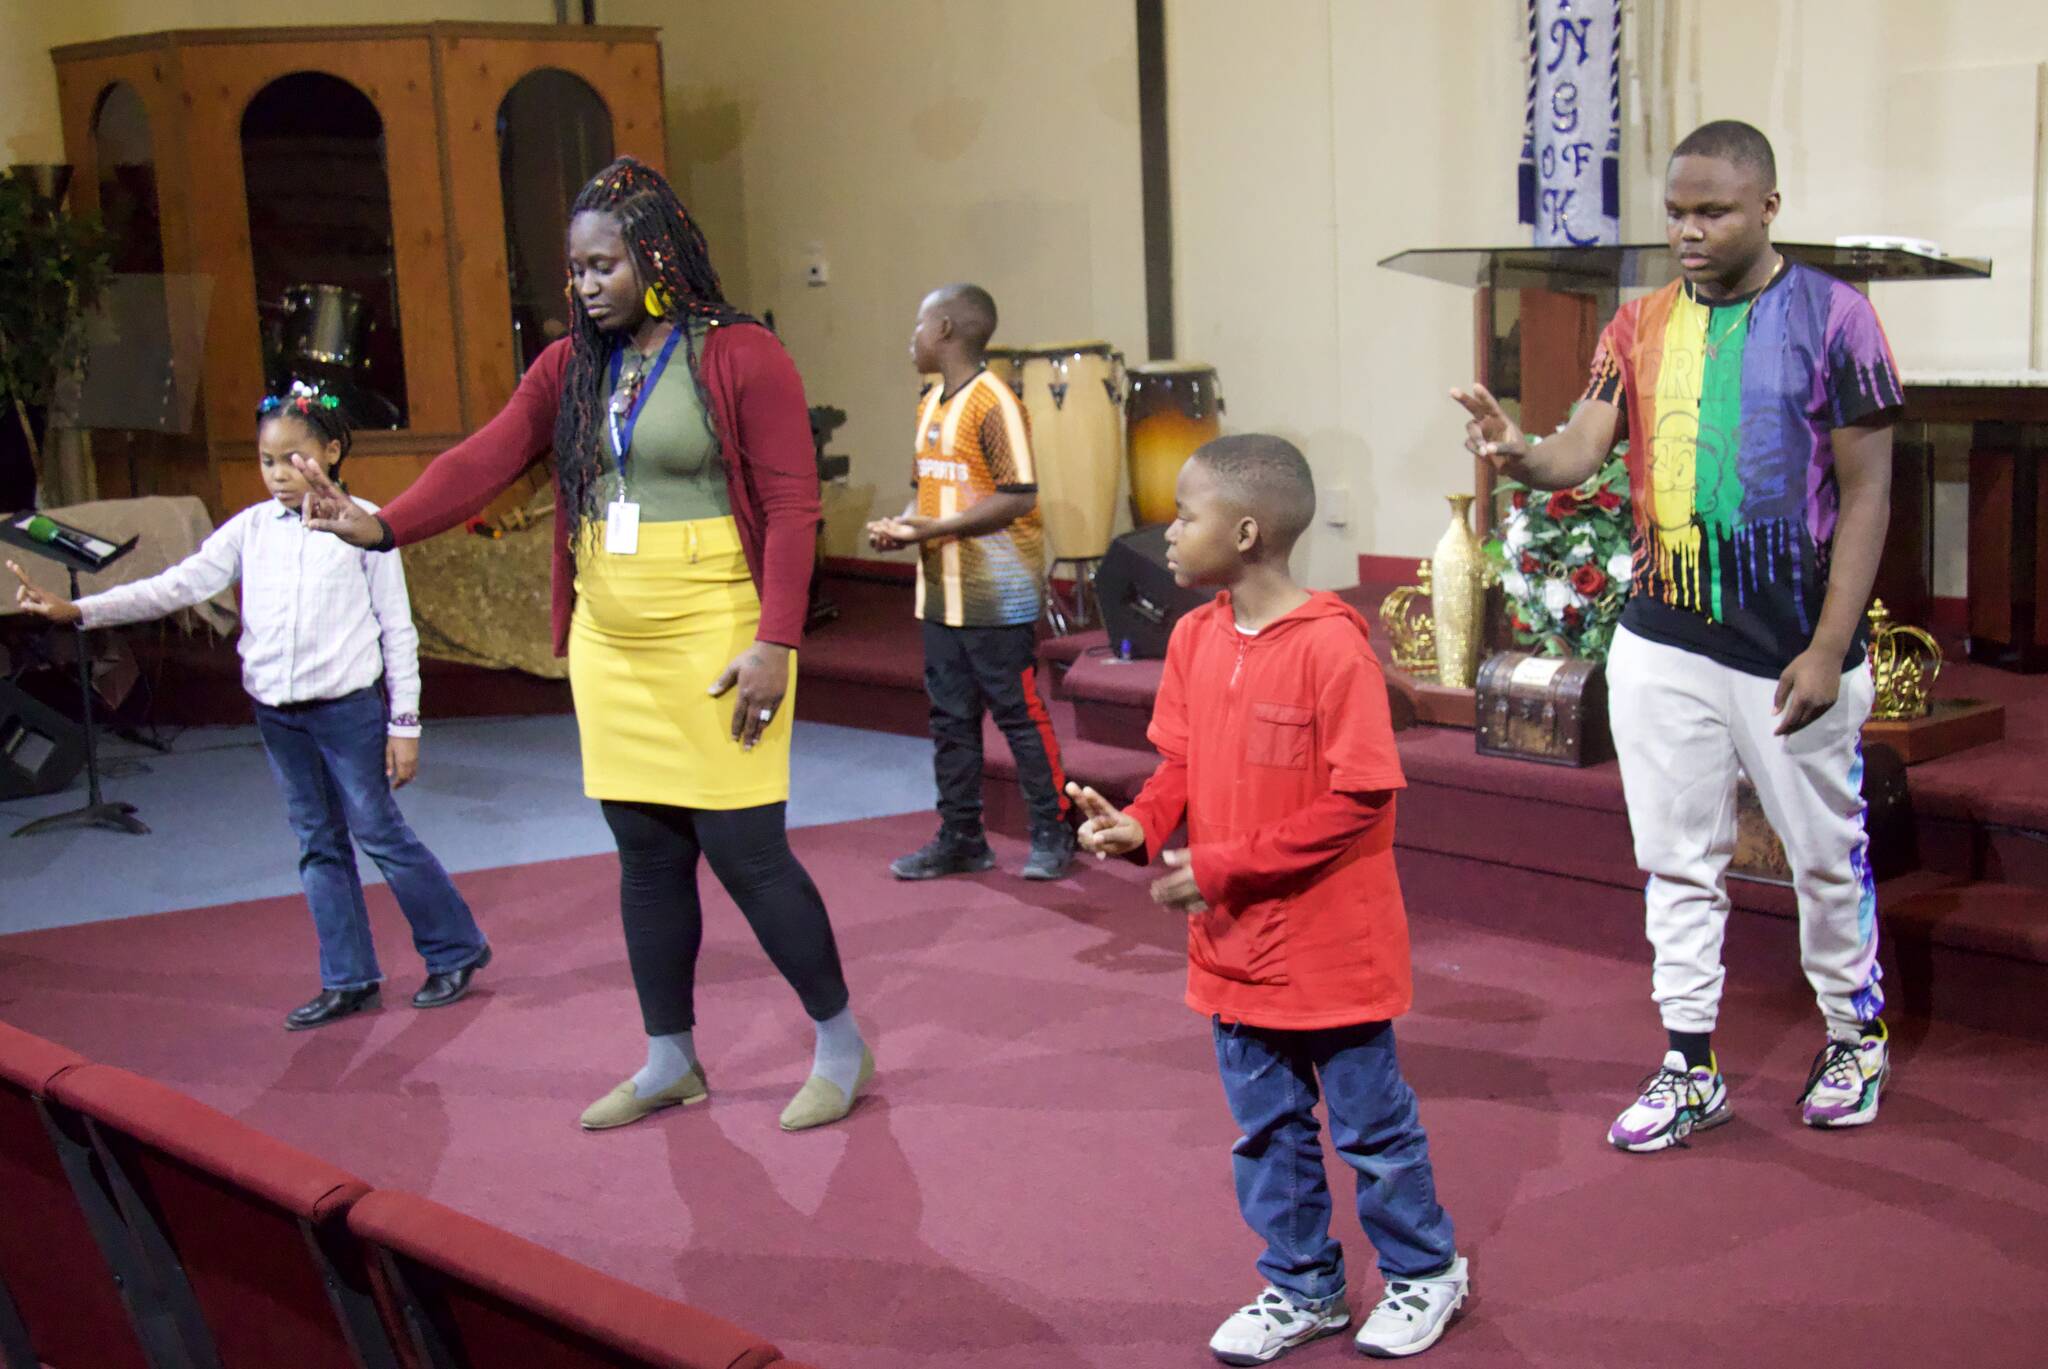 Wismine D’Avilar (second from left) leads a rehearsal for the annual Martin Luther King Jr. event at the House of Prayer. (Photo by Rachel Rosen/Whidbey News-Times)